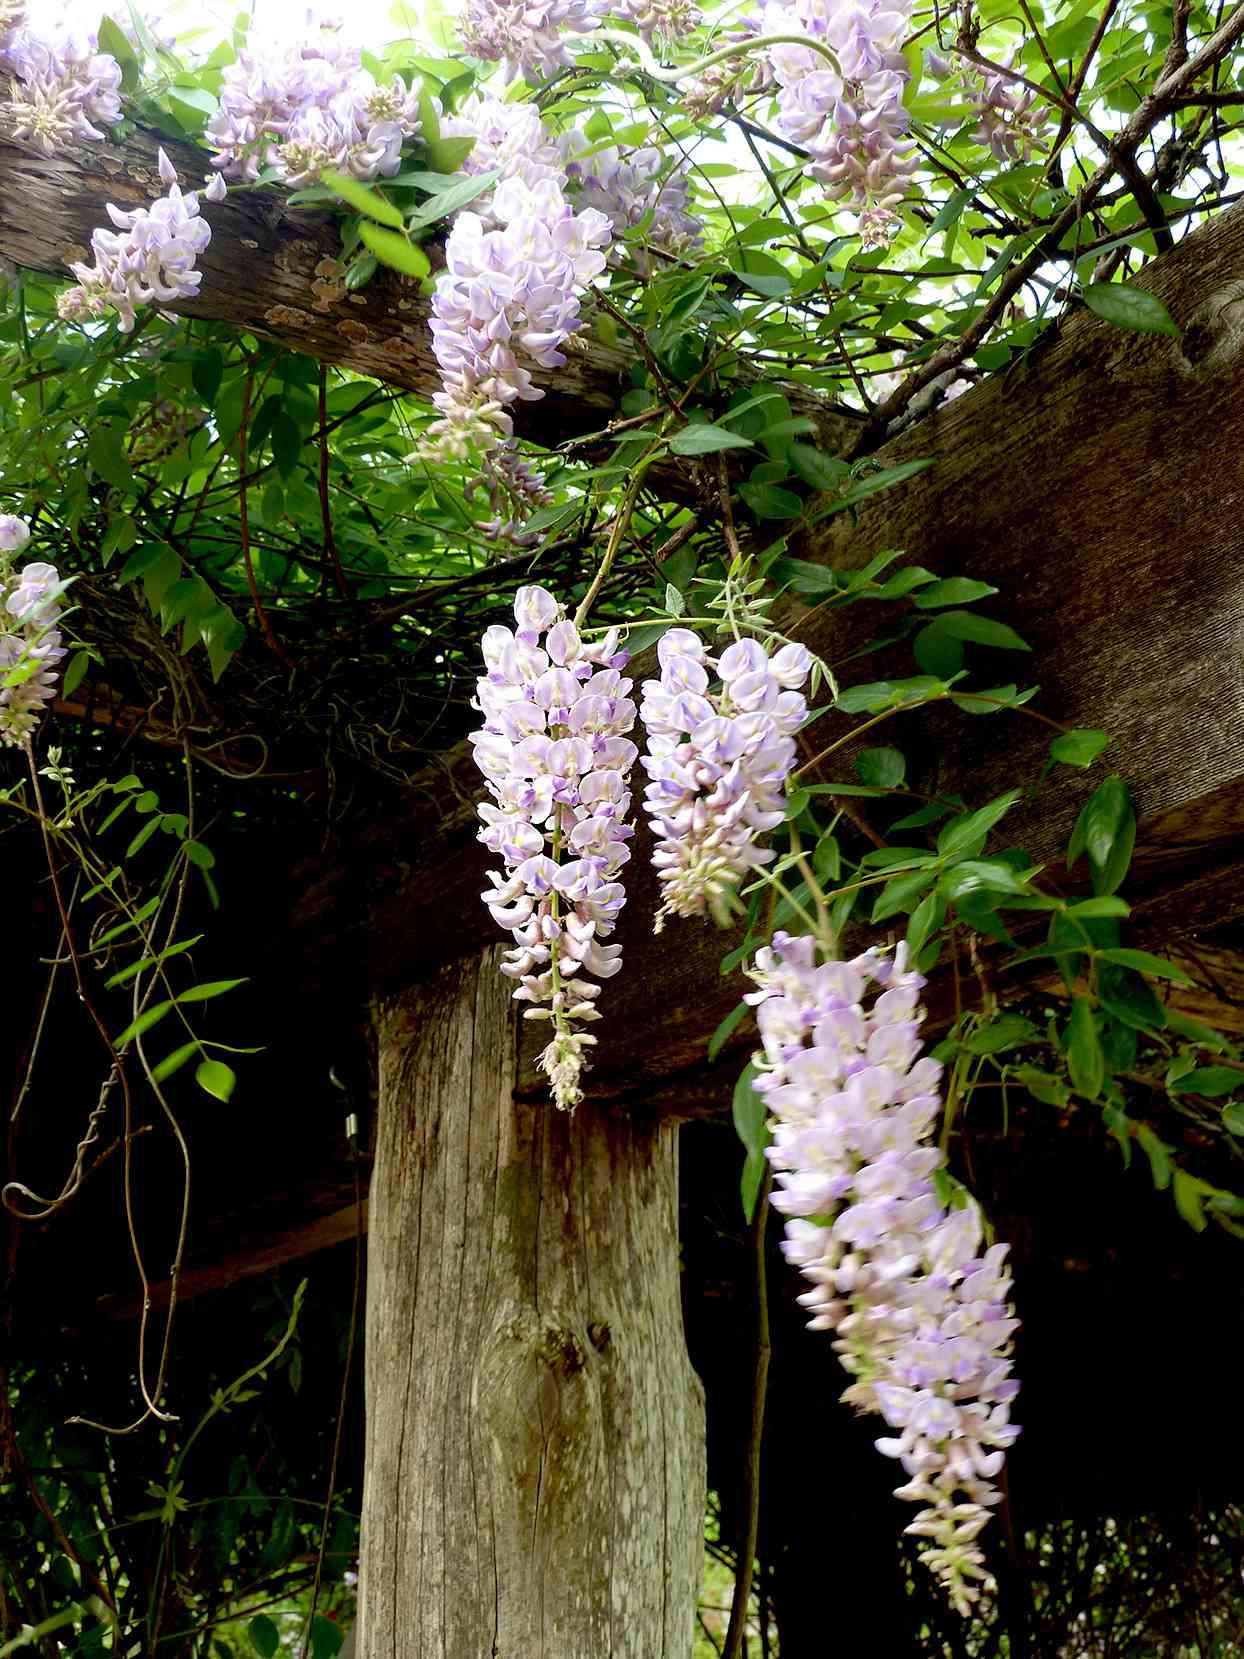 American Wisteria hanging on wood